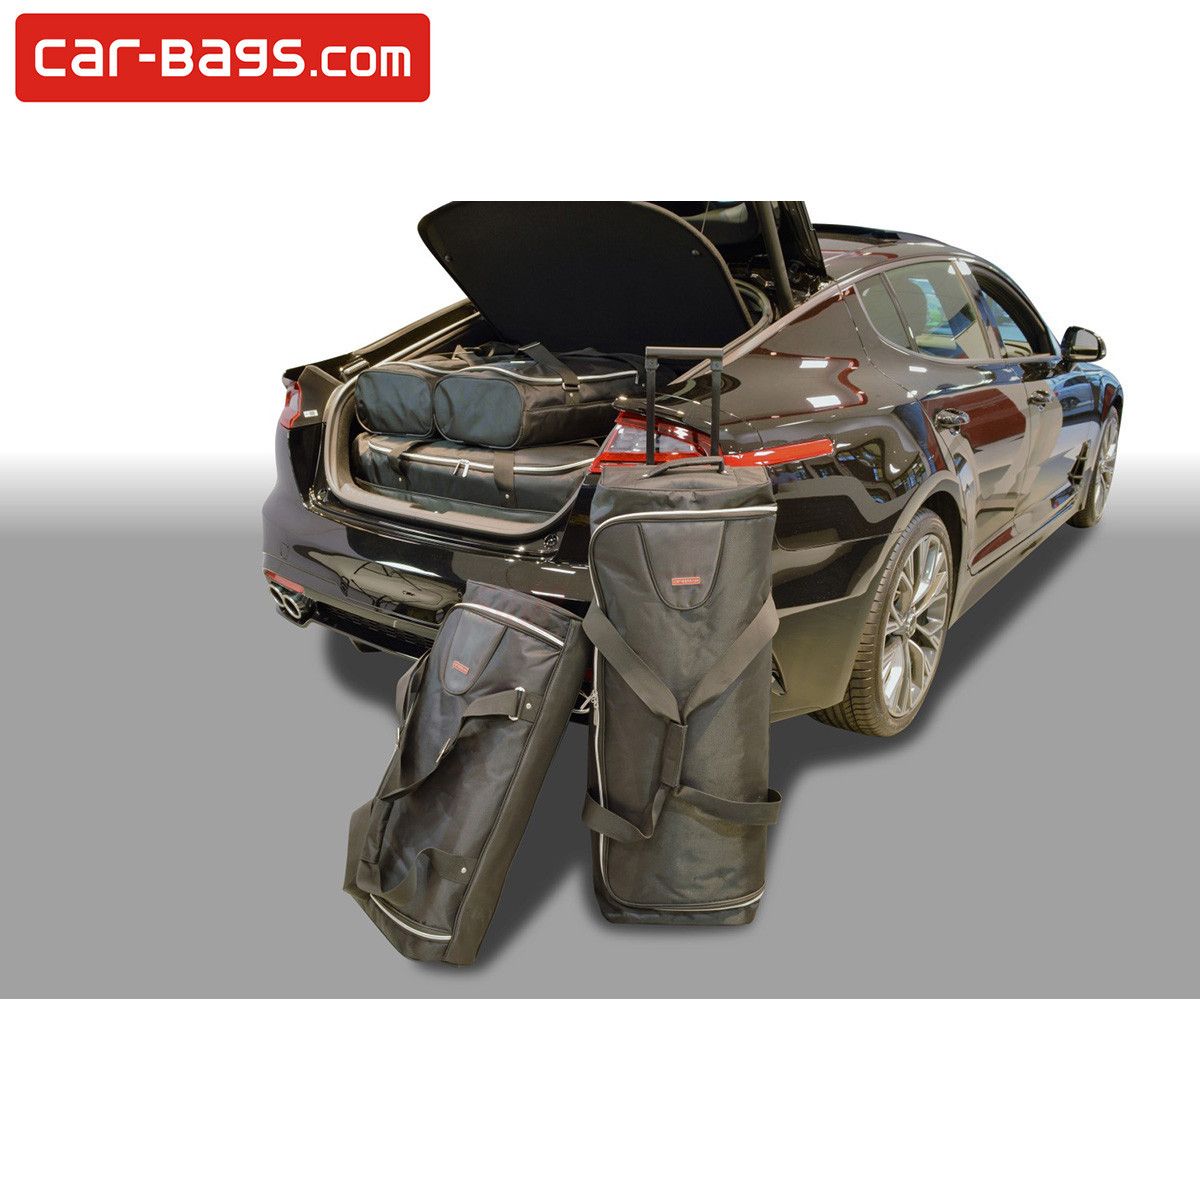 Travel bags fits Kia Stinger tailor made (6 bags), Time and space saving  for € 379, Perfect fit Car Bags